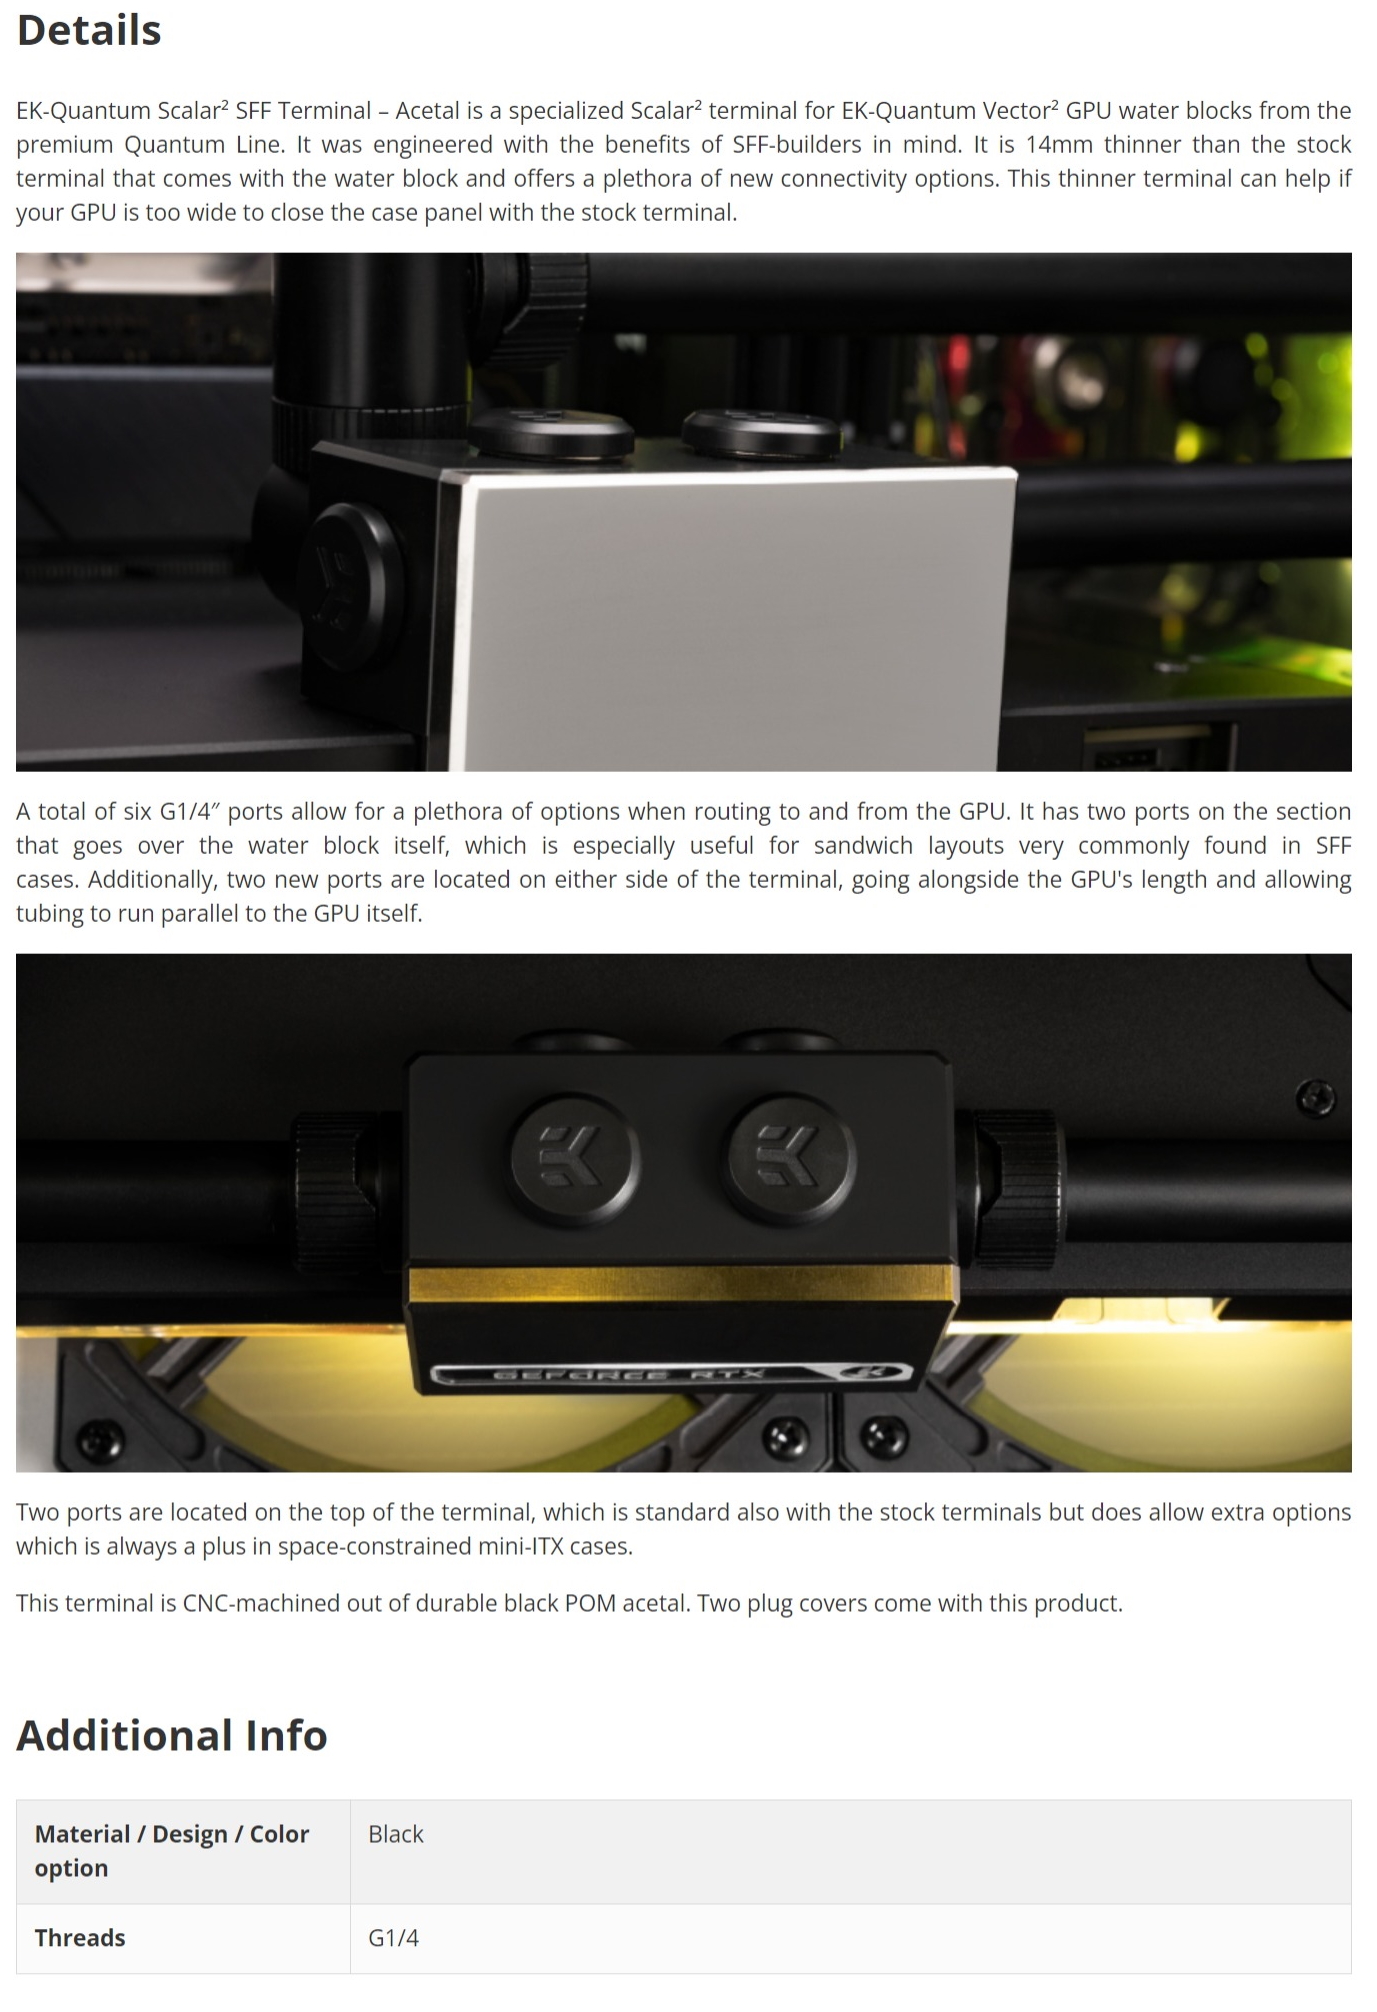 A large marketing image providing additional information about the product EK Quantum Scalar2 SFF Terminal – Acetal - Additional alt info not provided